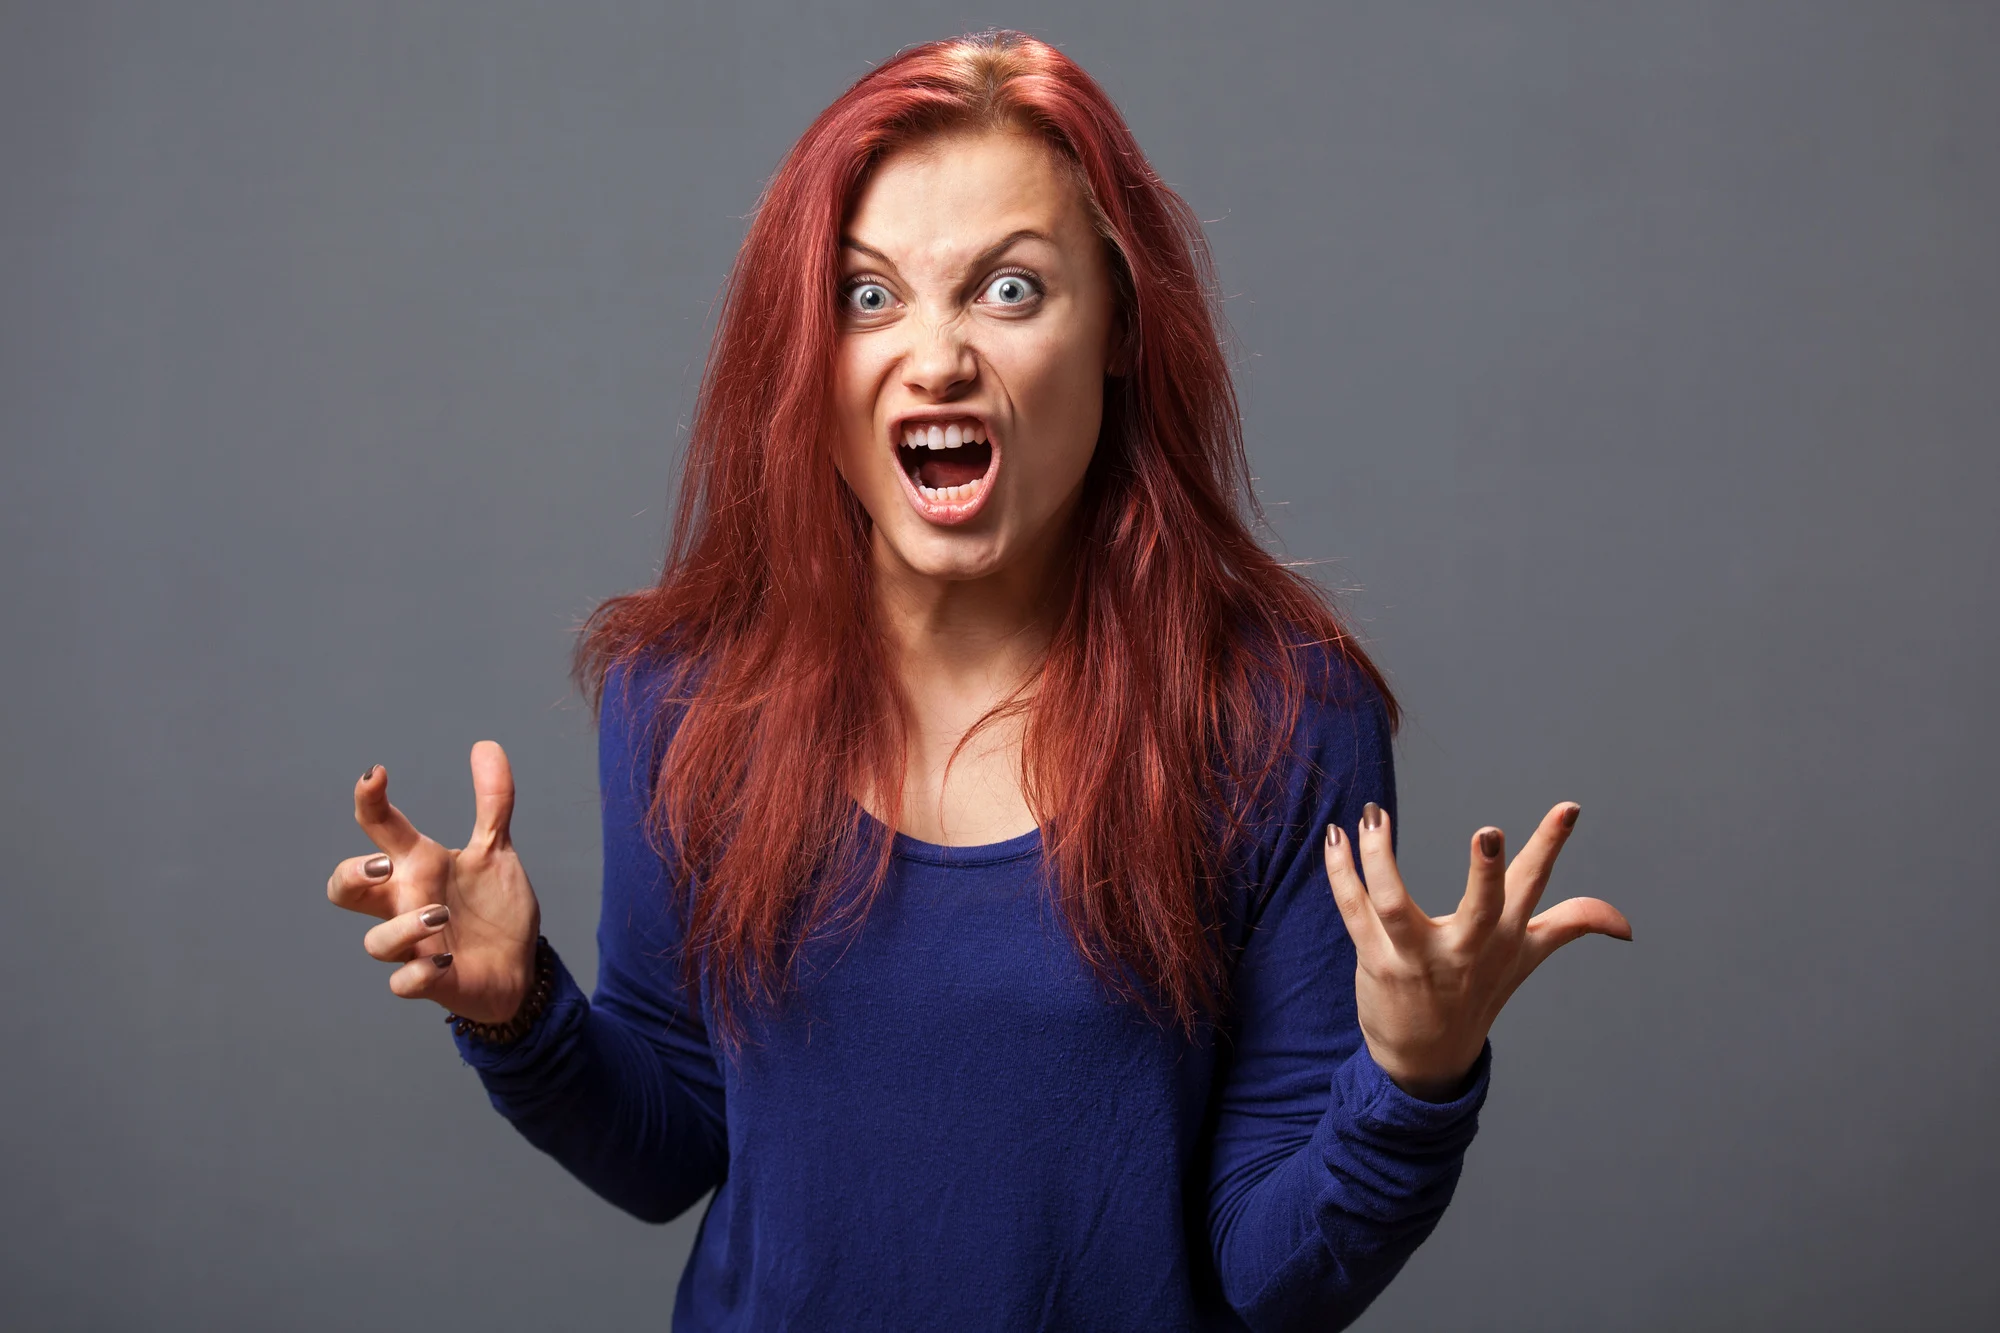 Young furious woman with opened mouth and mad look gesturing against gray background